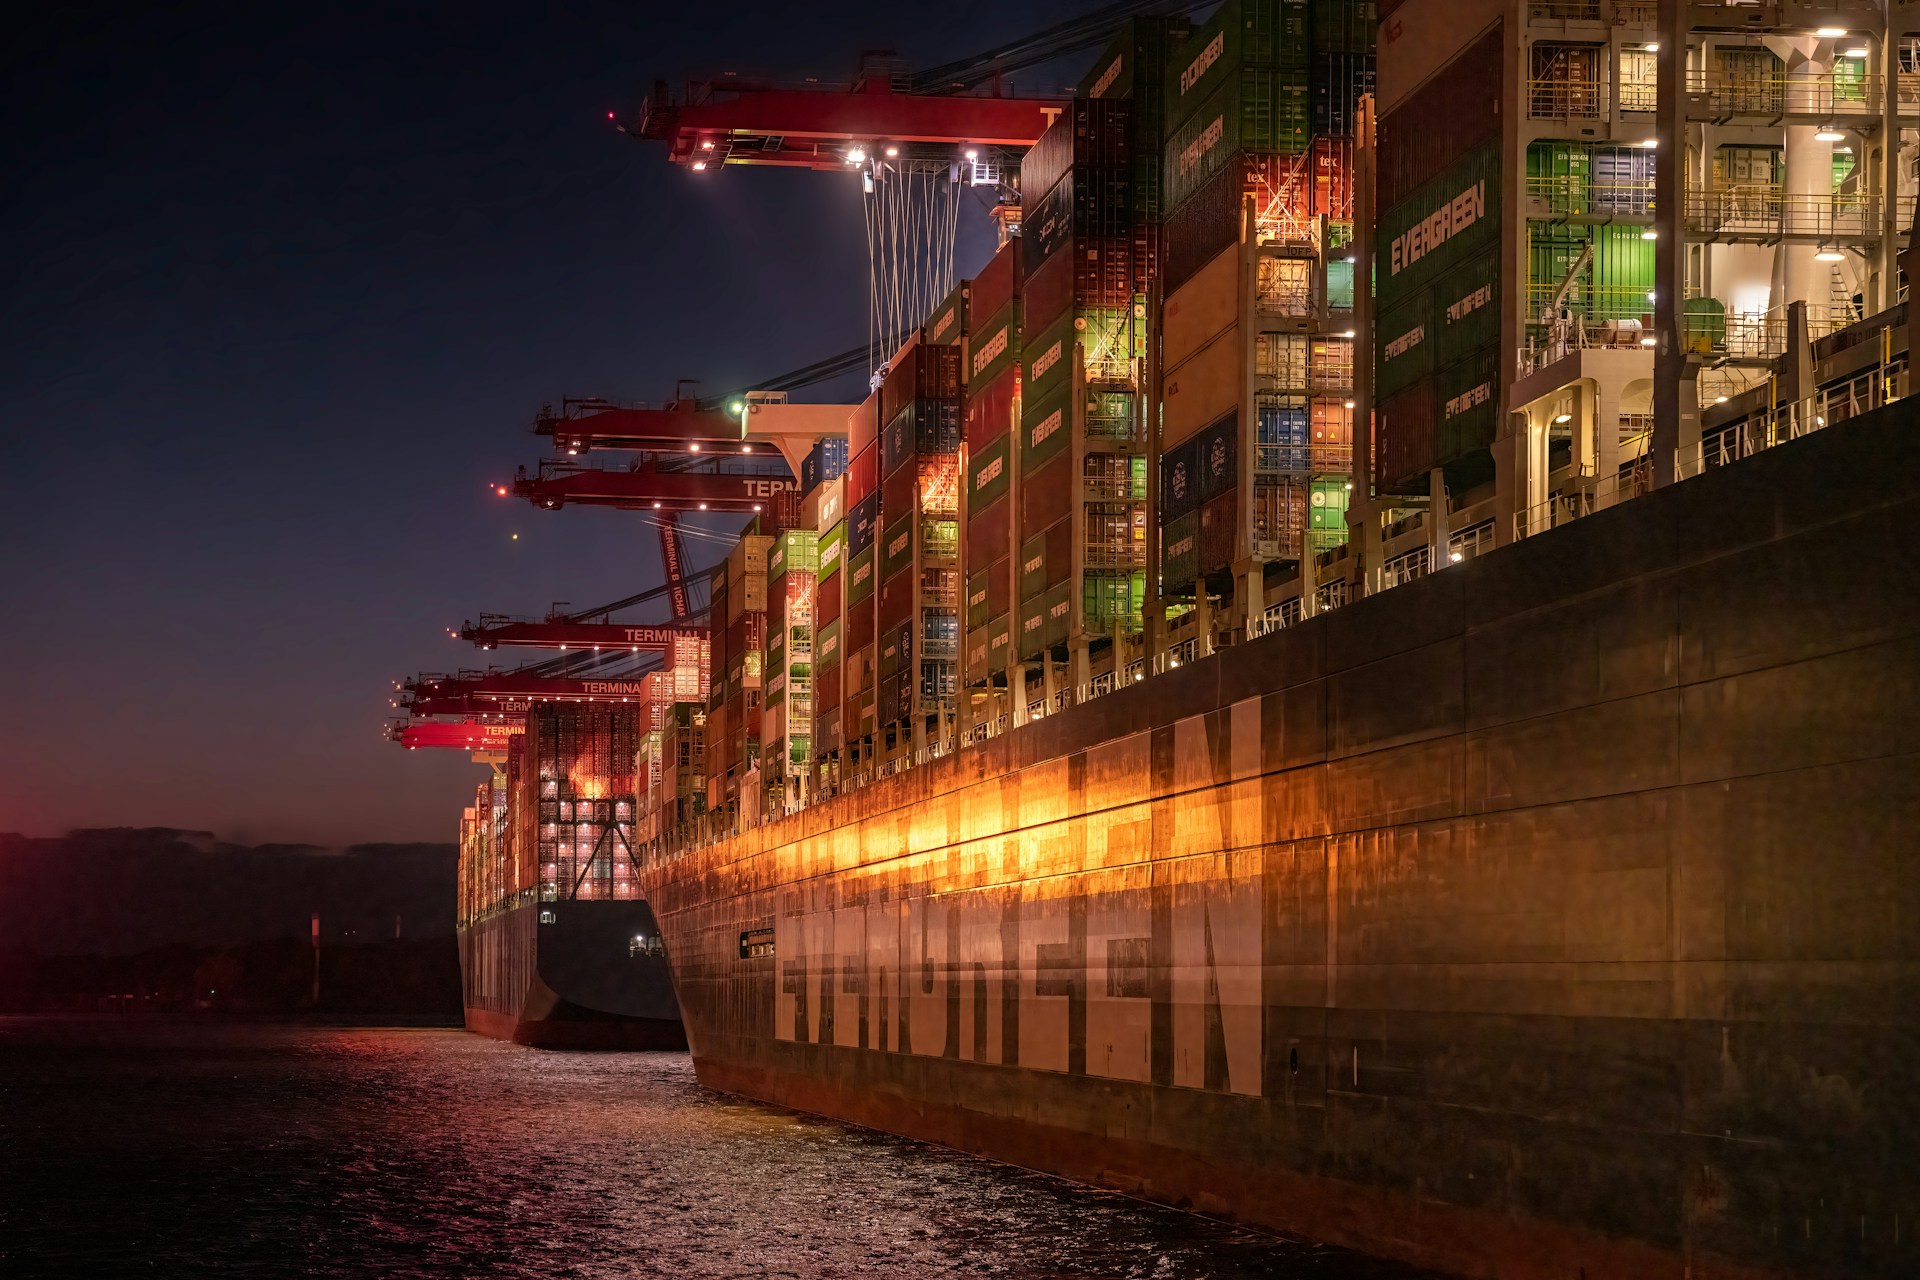 An Evergreen containership at night